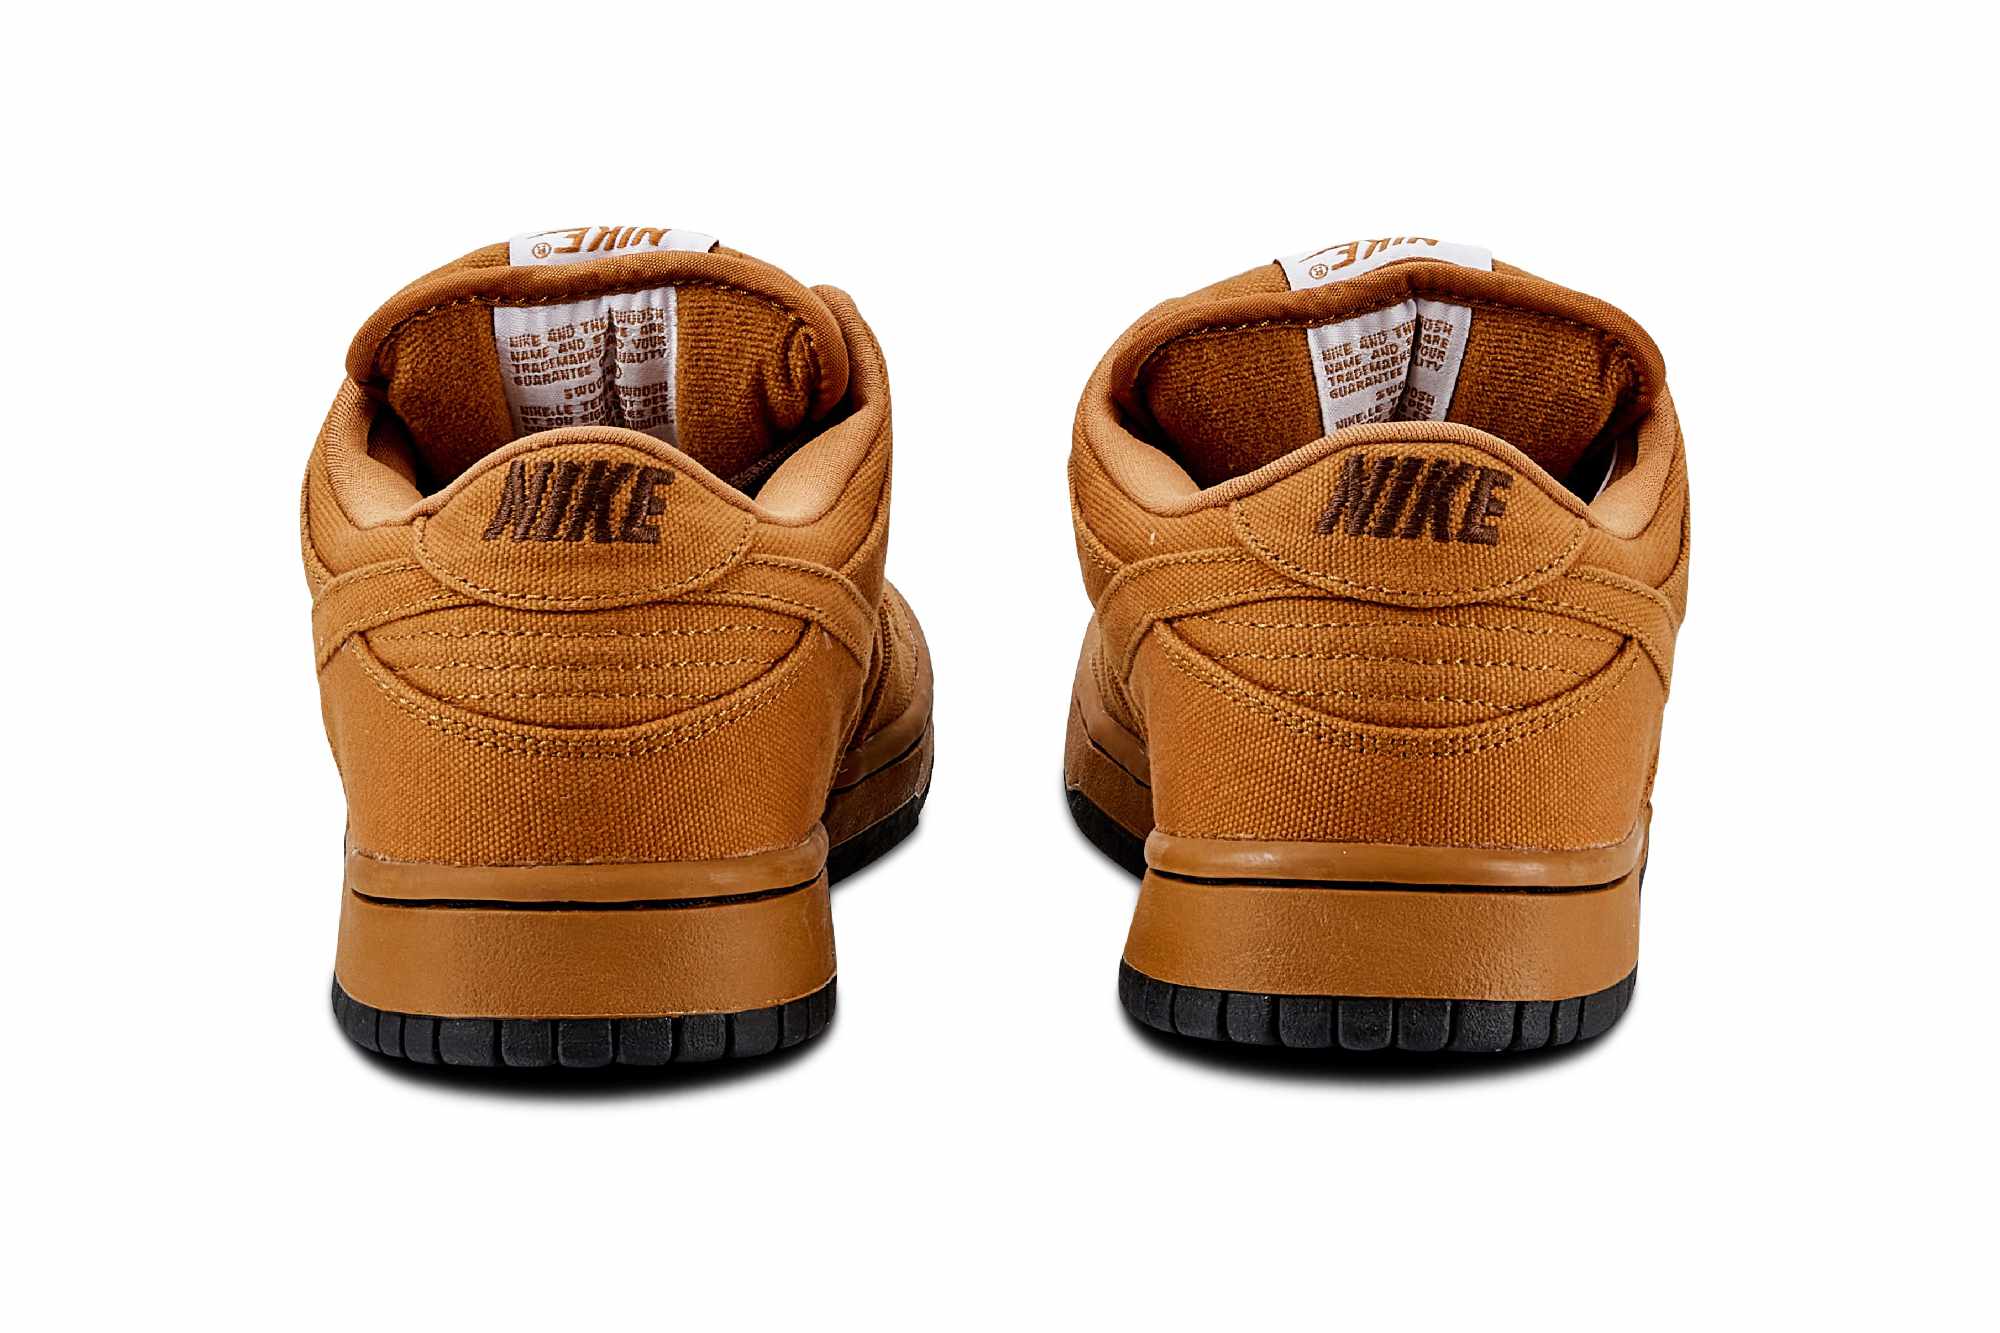 A rear photo of Carhartt & Nike's Dunk sneakers from 2004